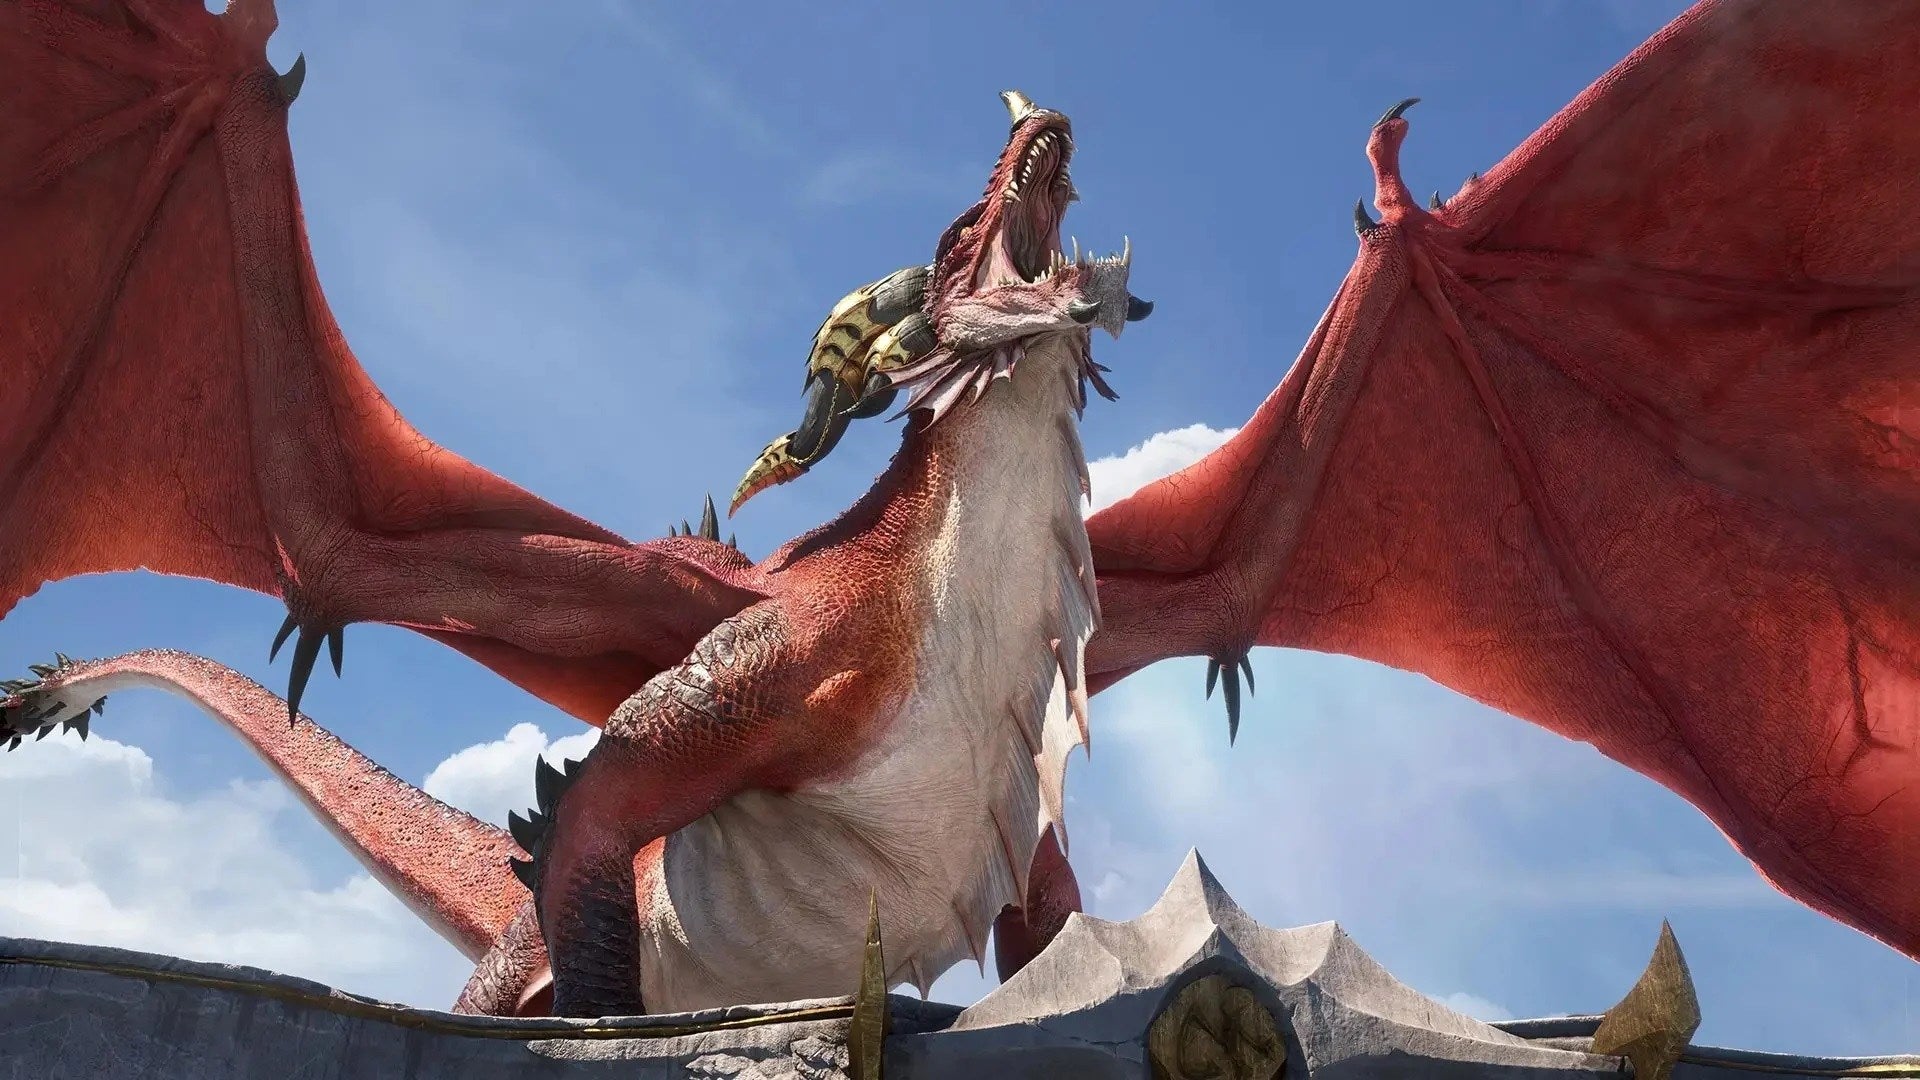 World Of Warcraft: Dragonflight is the next expansion for Blizzard's long-running MMORPG.